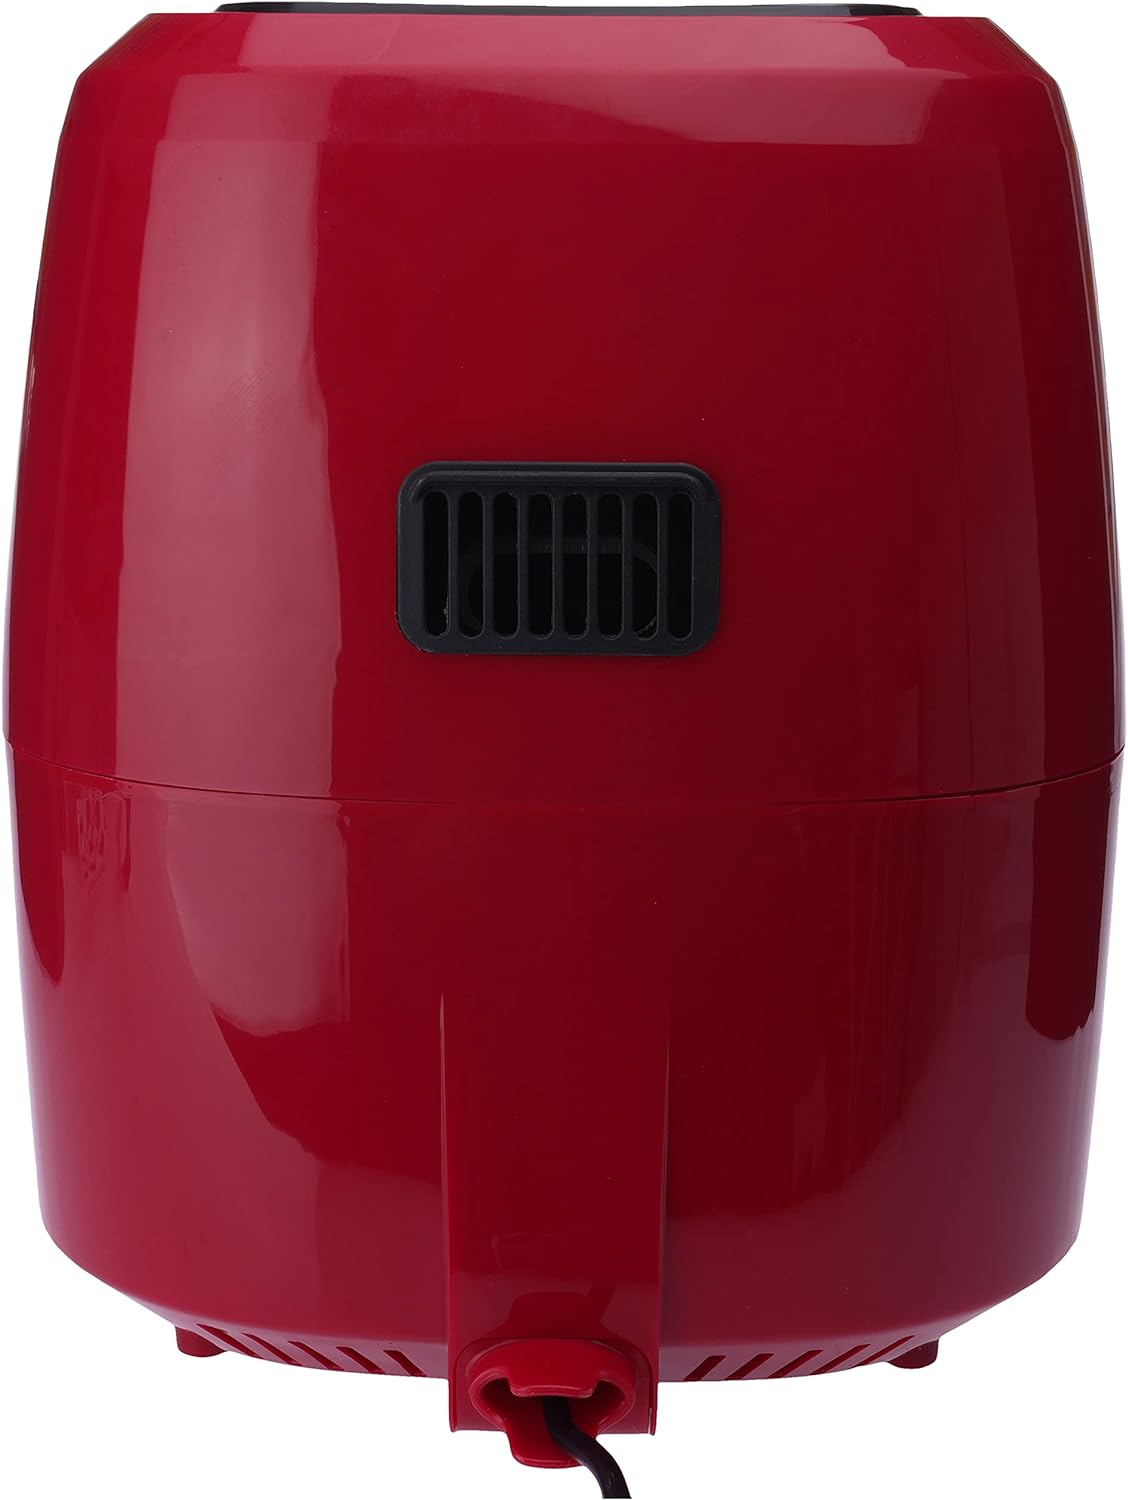 ALSAIF 6Liter 1800W Electric Air Healthy Fryer With Timer to Fry, Bake, Grill, Roast Or Reheat, Red AL7204 2 Years warranty